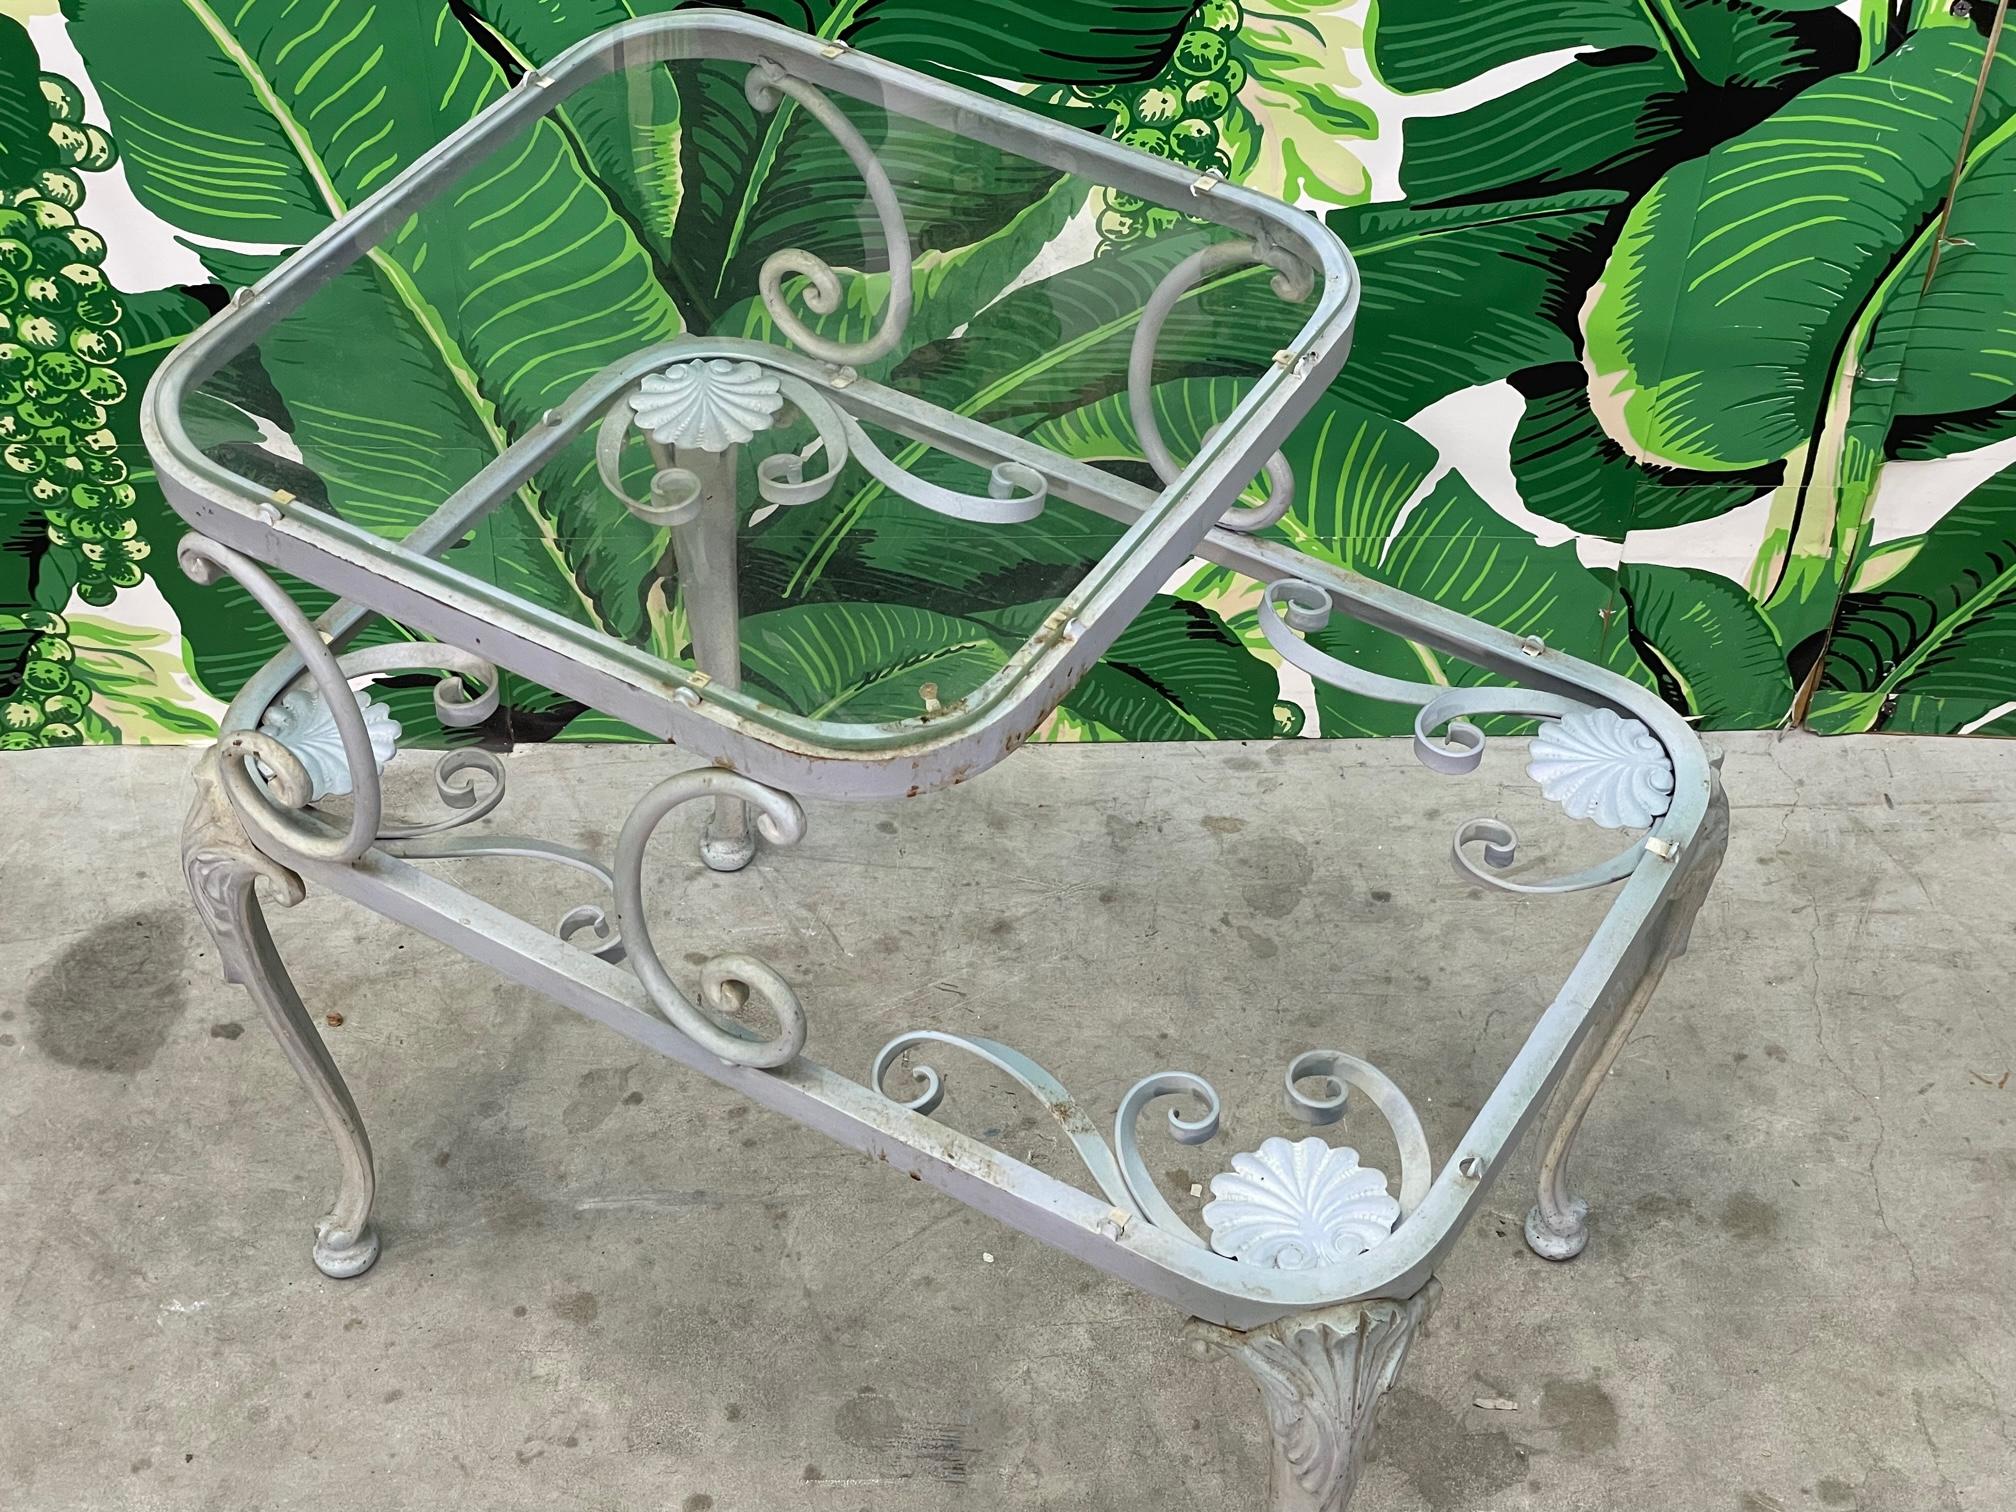 Midcentury wrought iron step table by Russell Woodard features floral detailing and two shelves. Lower shelf is missing glass. Good vintage condition with imperfections consistent with age, see photos for condition details. We also have the matching